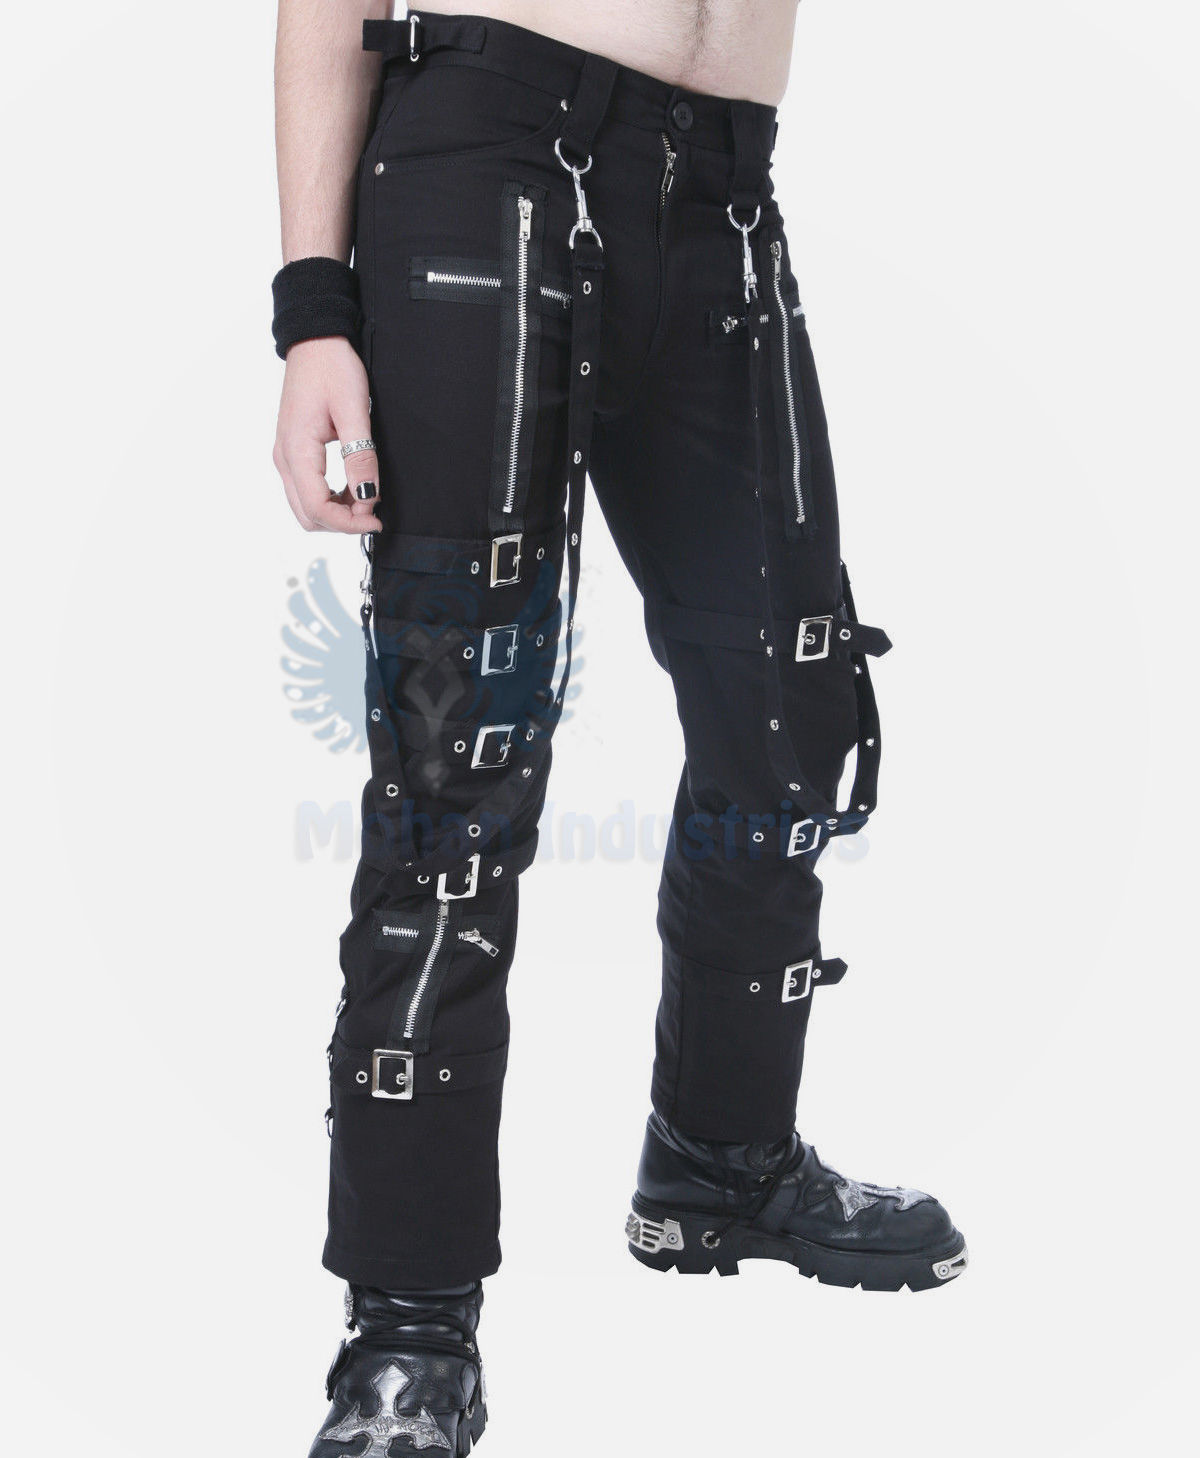 mi-419-black-buckle-zips-chains-straps-trousers-pants-cyber-goth-rave